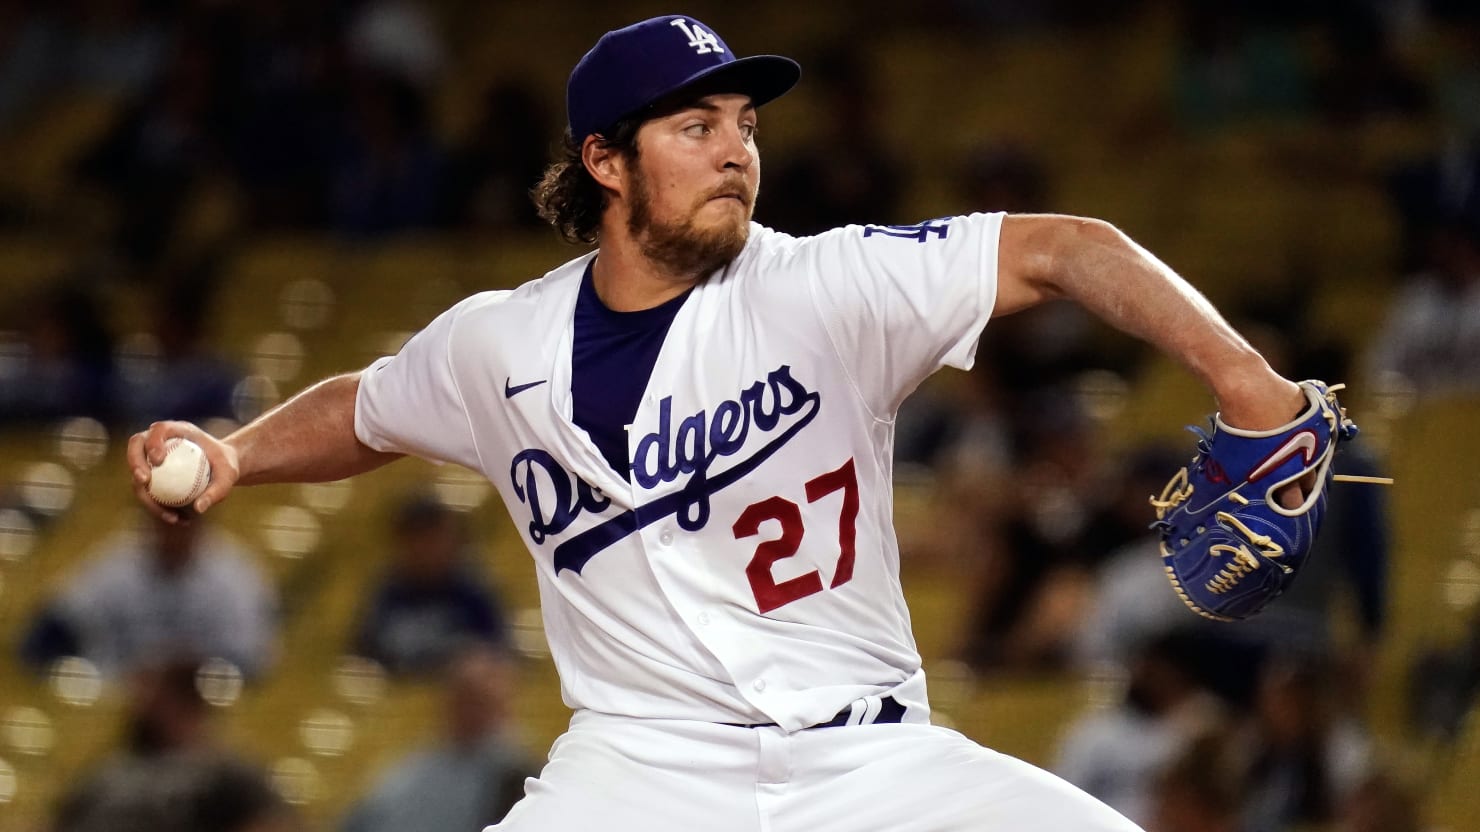 Dodgers' Trevor Bauer choked woman unconscious, according to